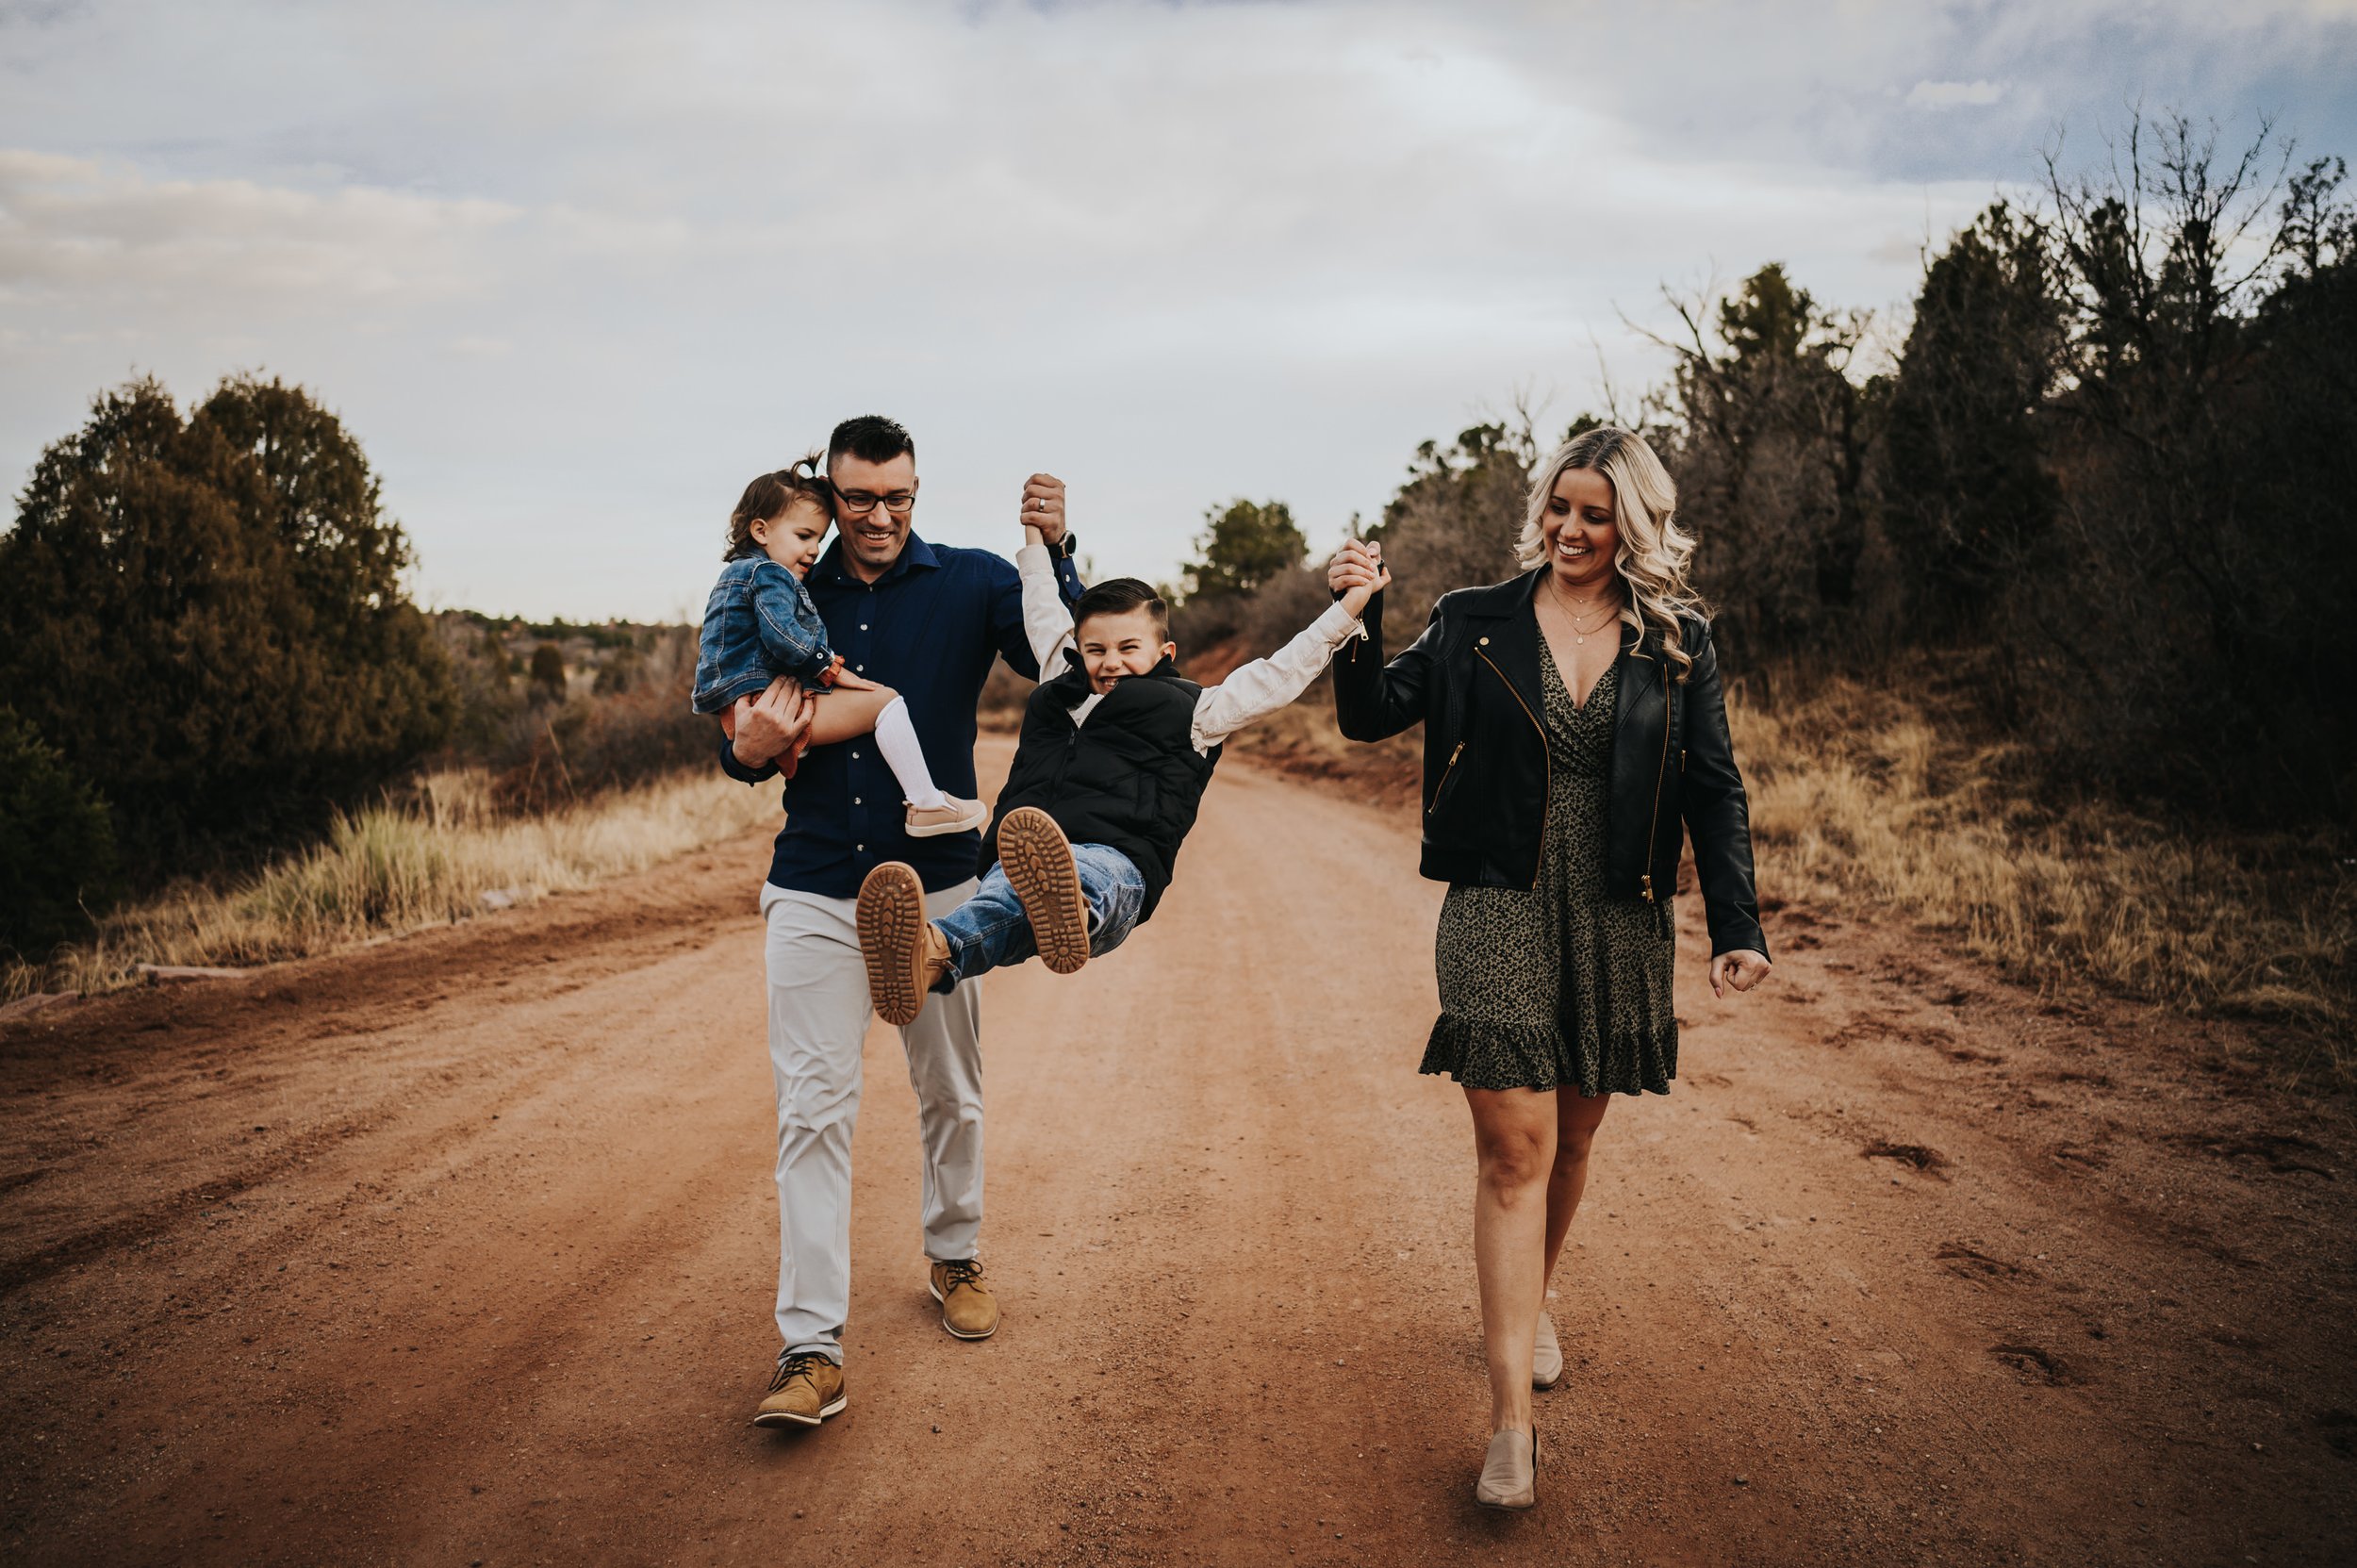 AnneMarie Jameson Family Session Colorado Springs Colorado Photographer Garden of the Gods Sunset Mountain View Husband Wife Sons Daughter Wild Prairie Photography-11-2022.jpg